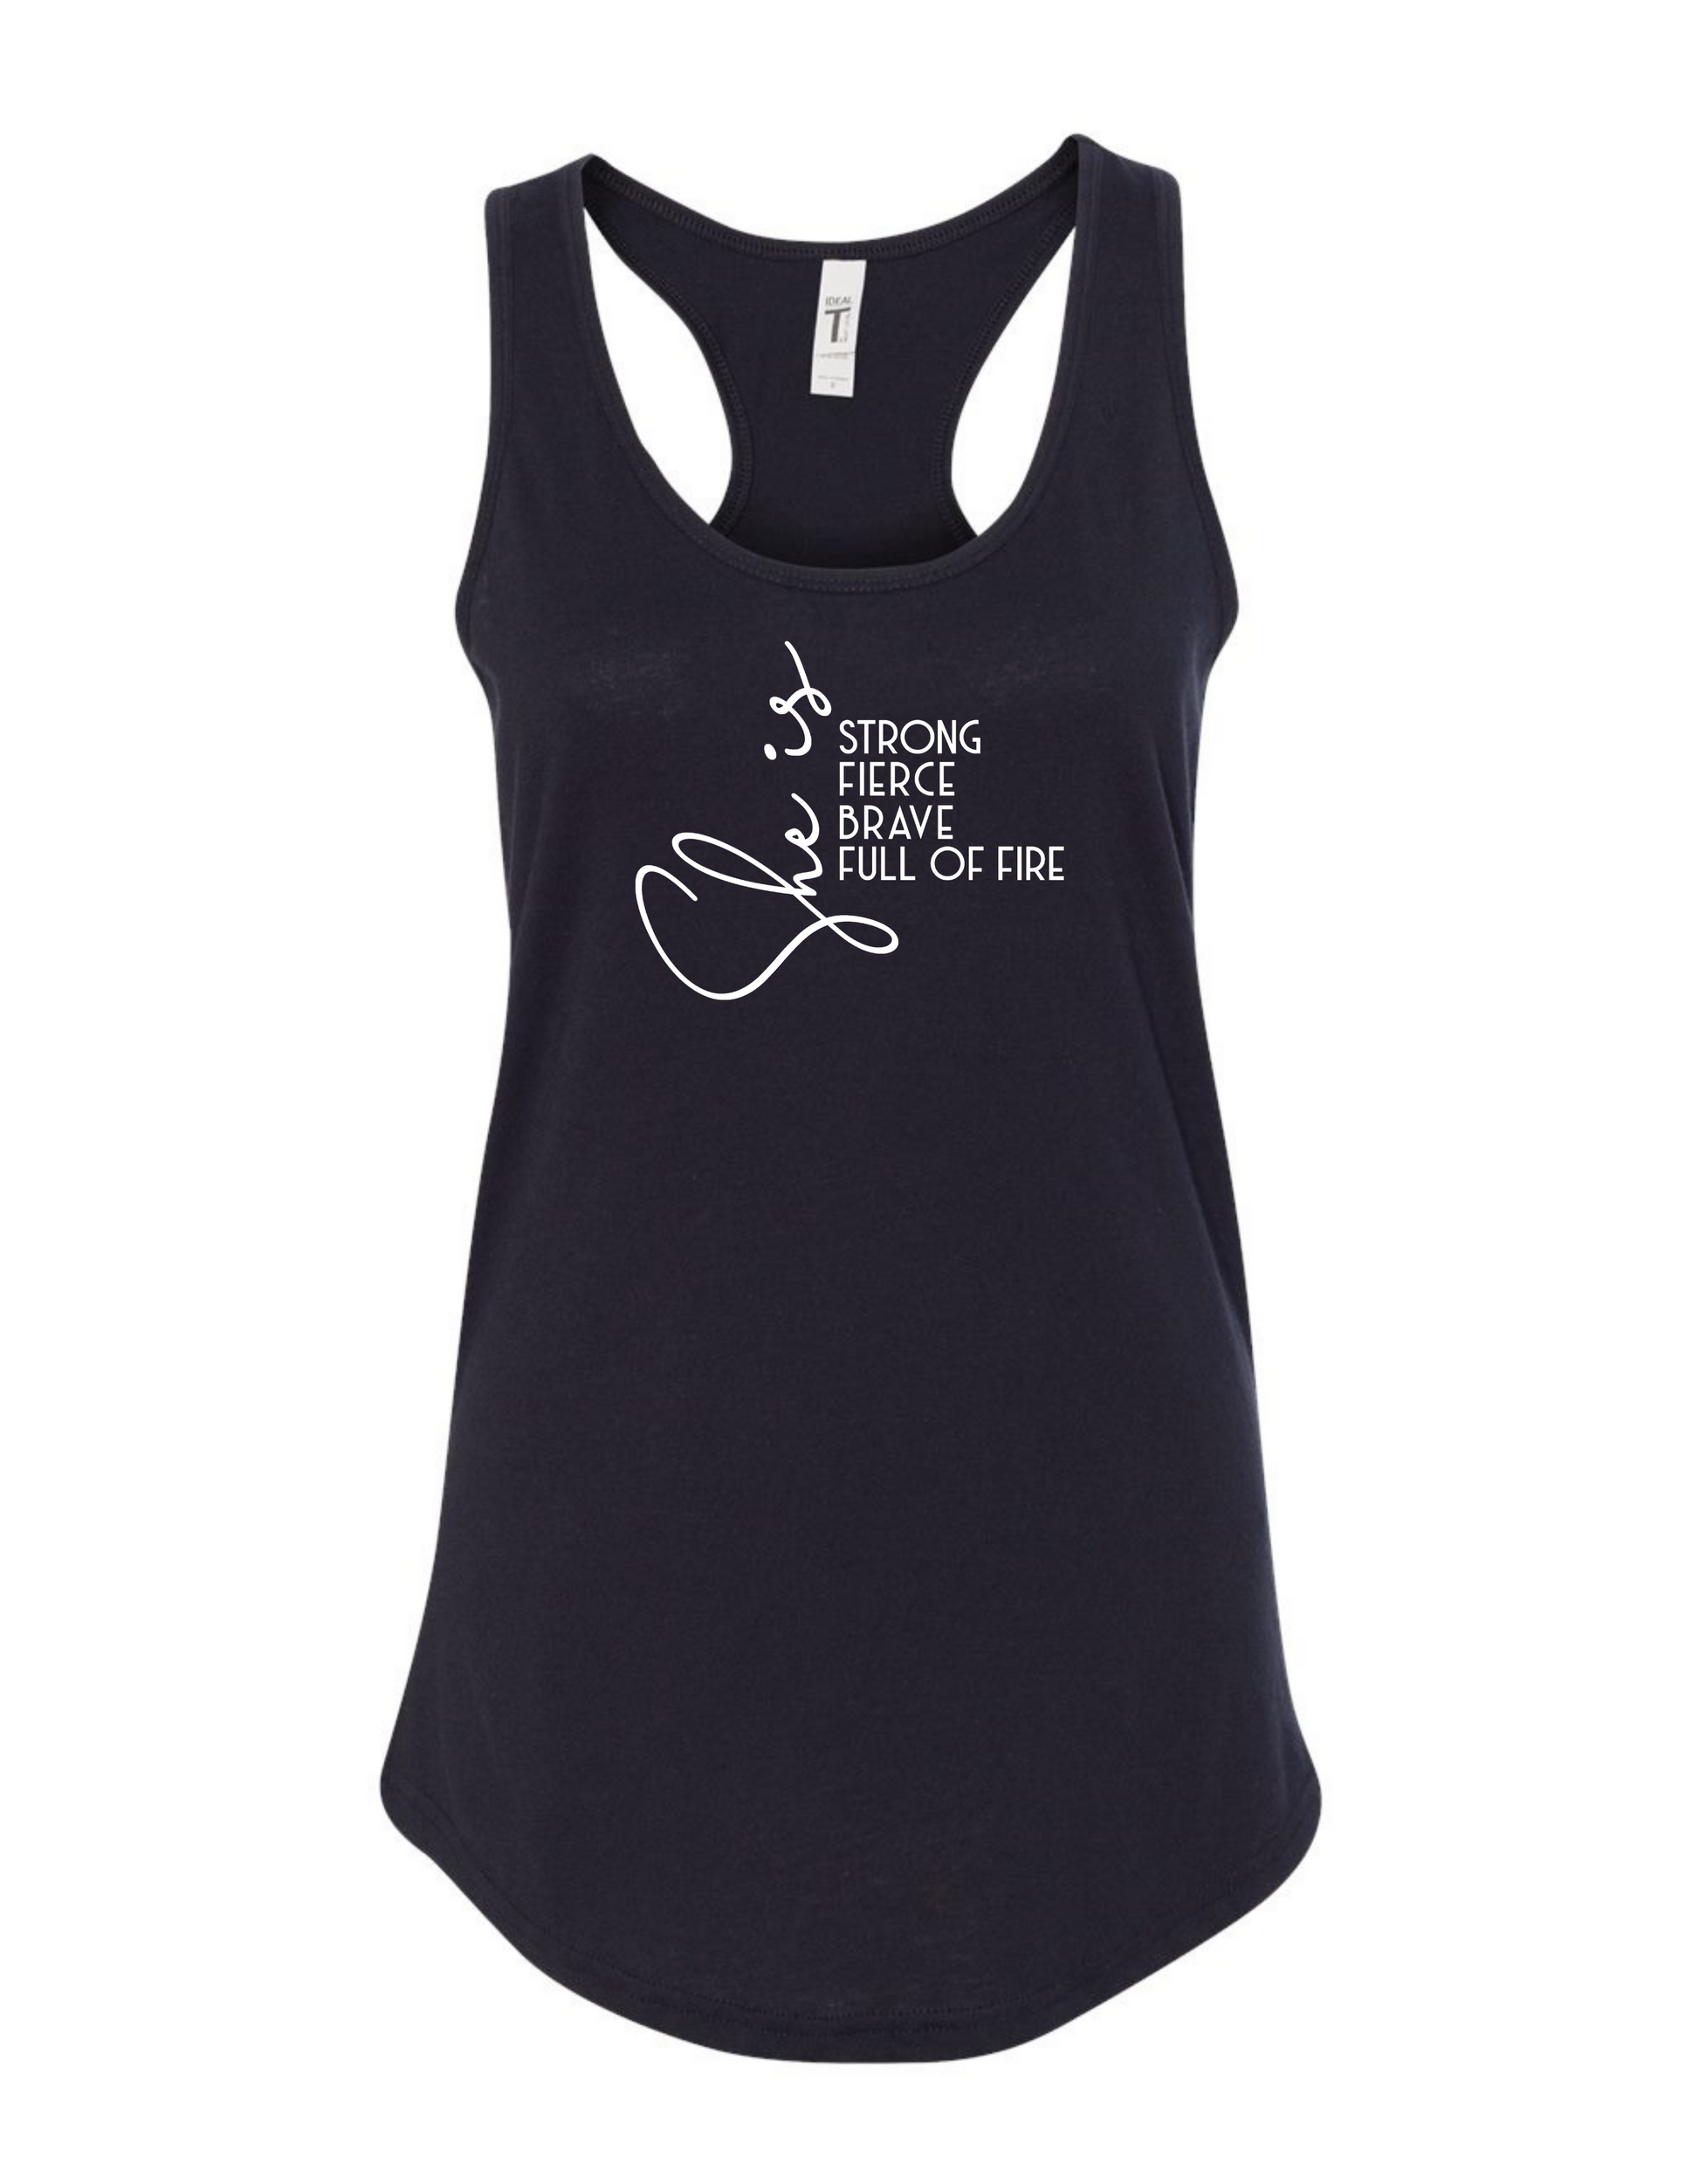 She Is... Racerback Ladies Tank - Mister Snarky's